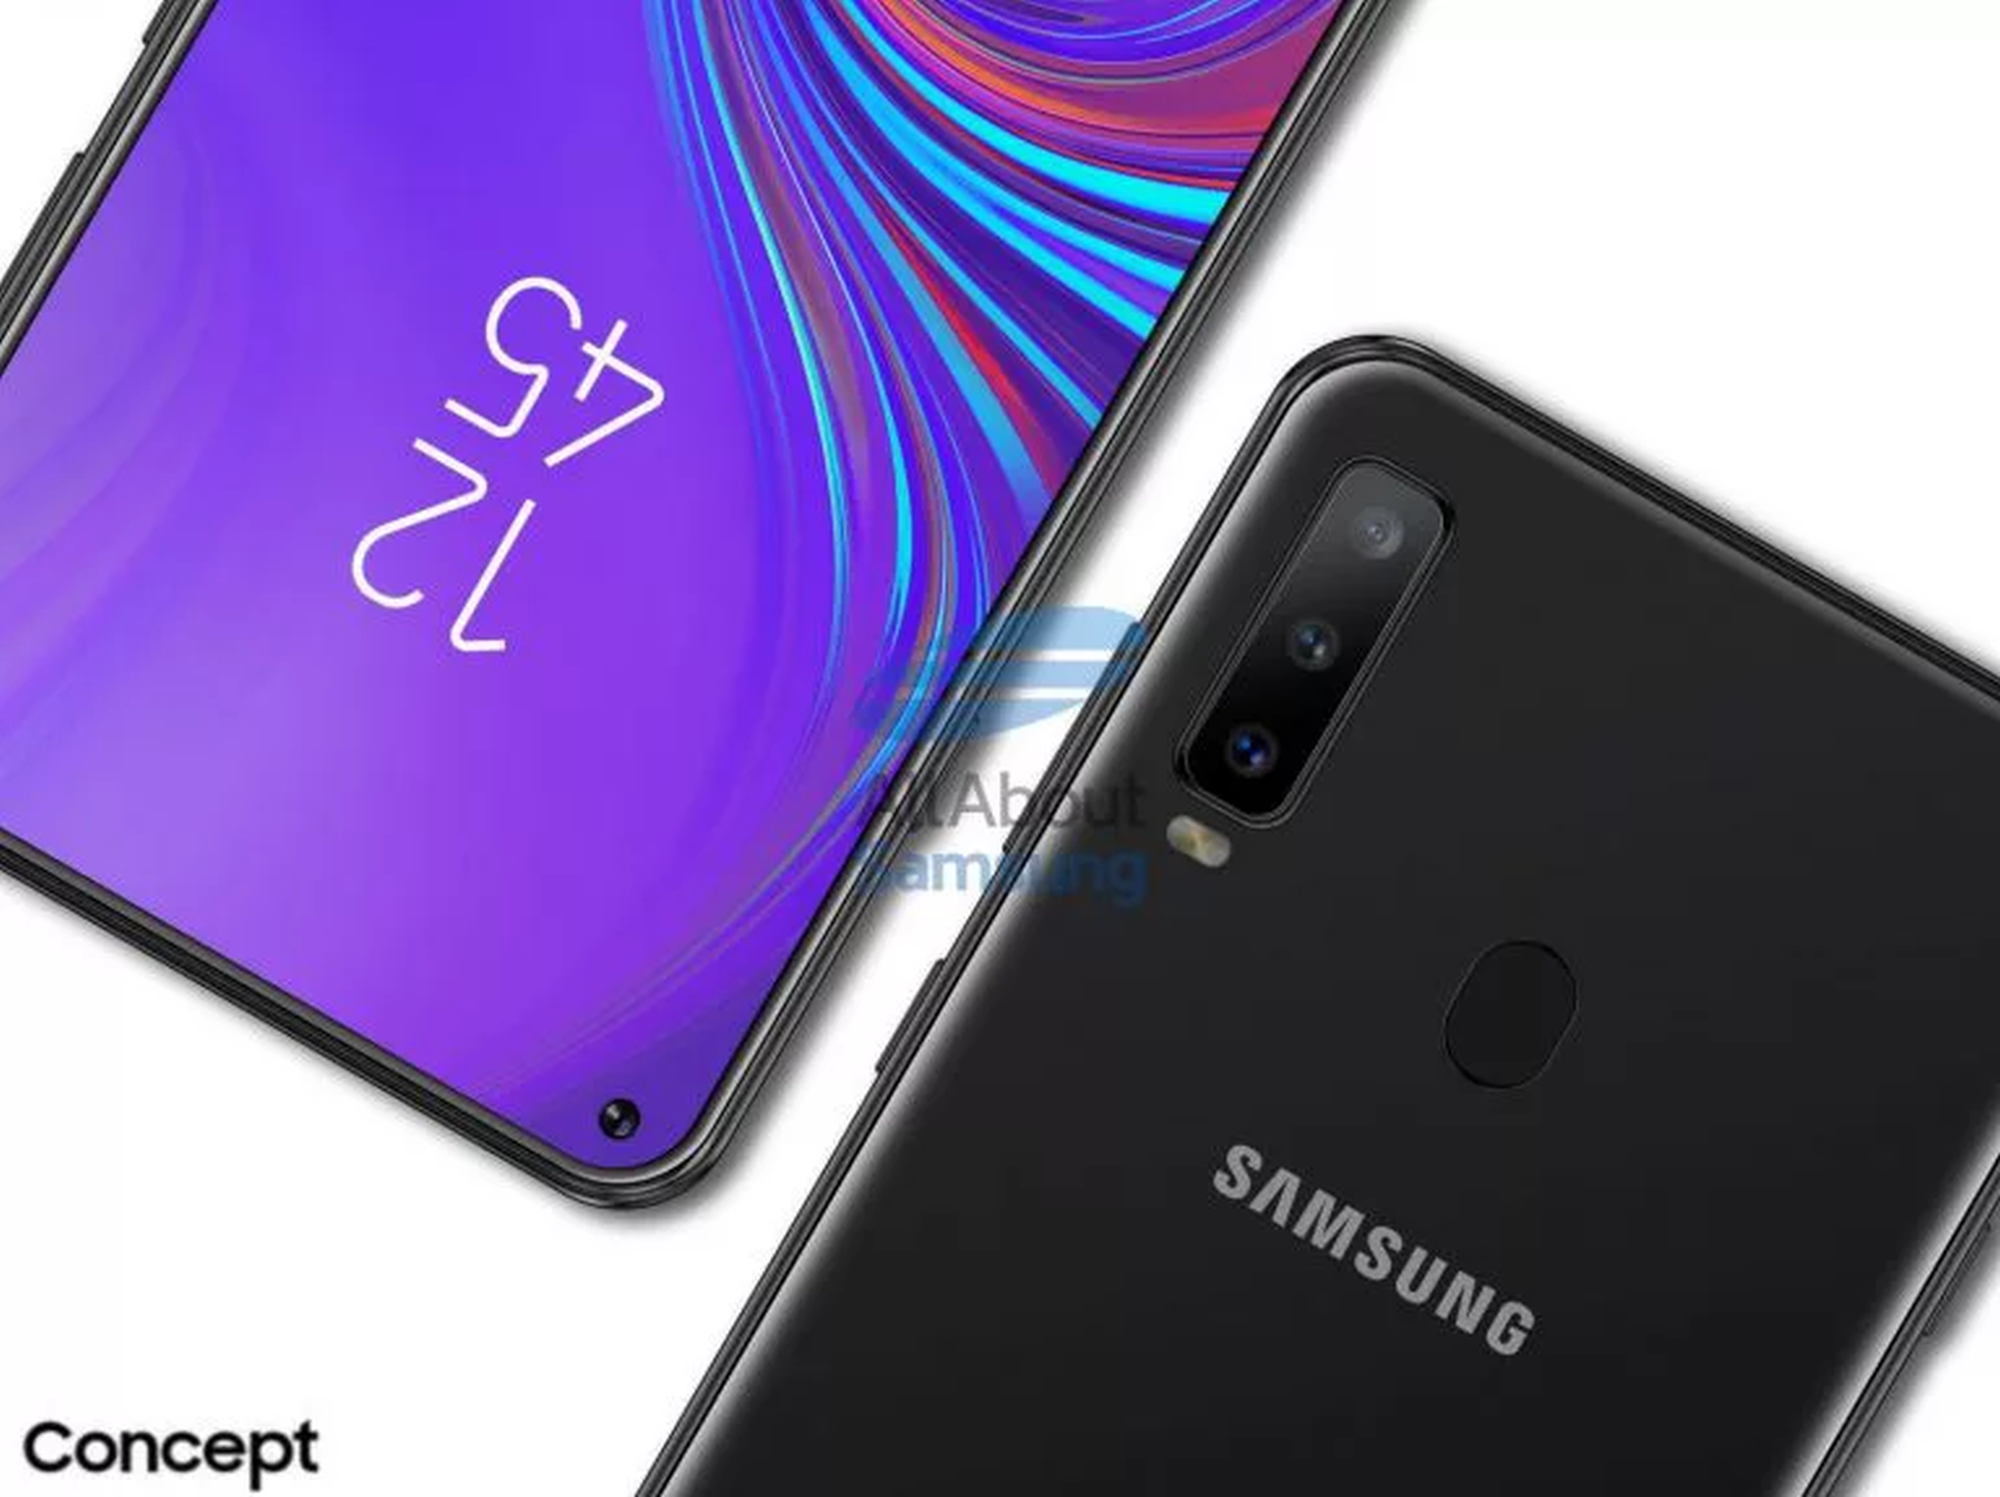 Galaxy A8s specs leaked